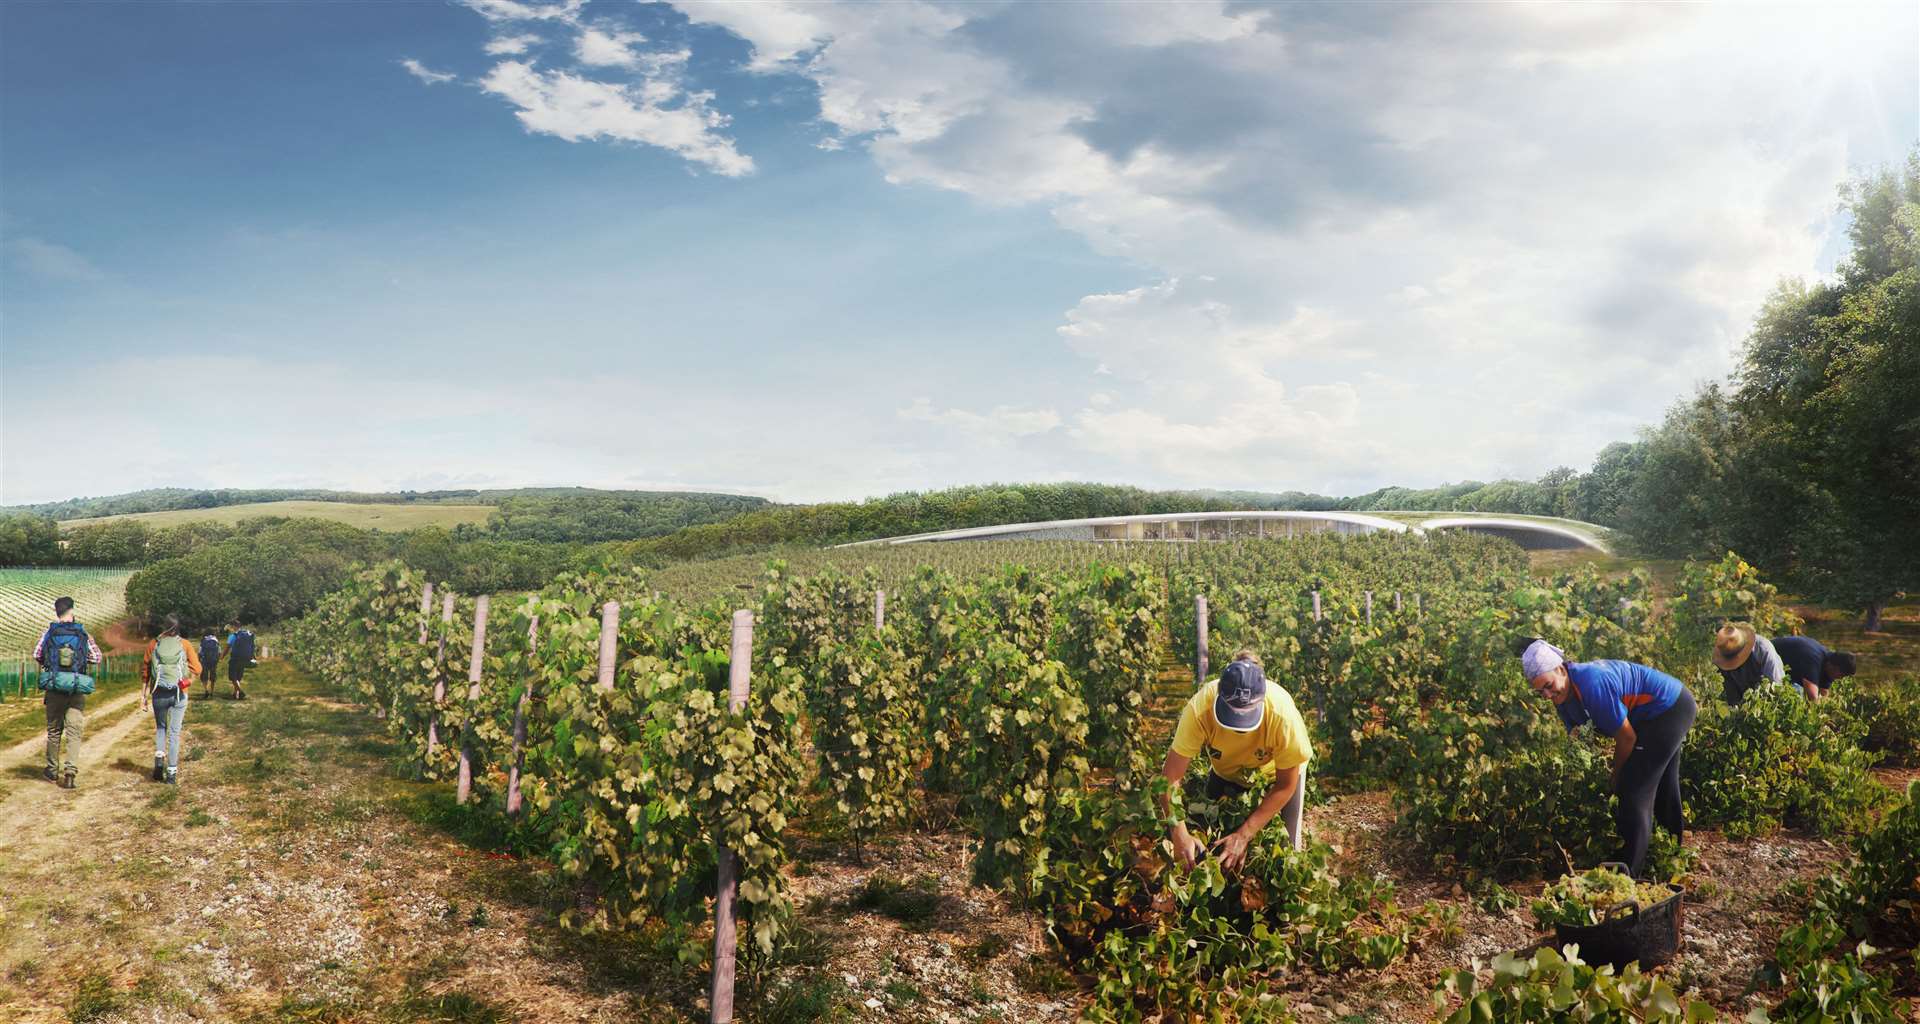 An artist's impression of the vineyard in Cuxton which would include parts of Luddesdown